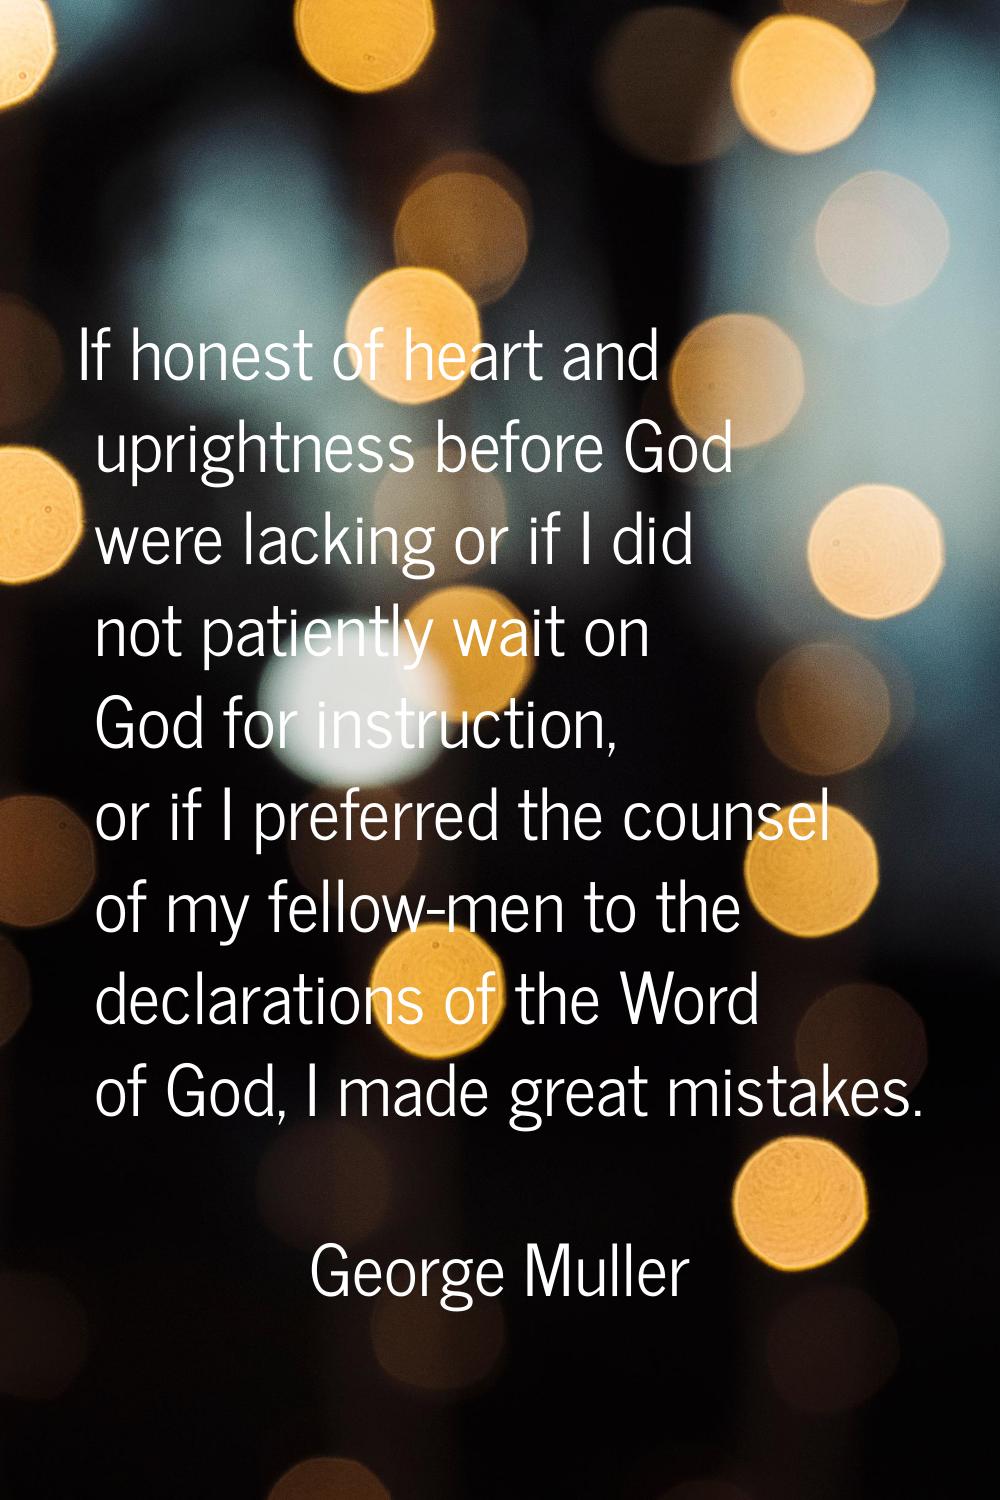 If honest of heart and uprightness before God were lacking or if I did not patiently wait on God fo